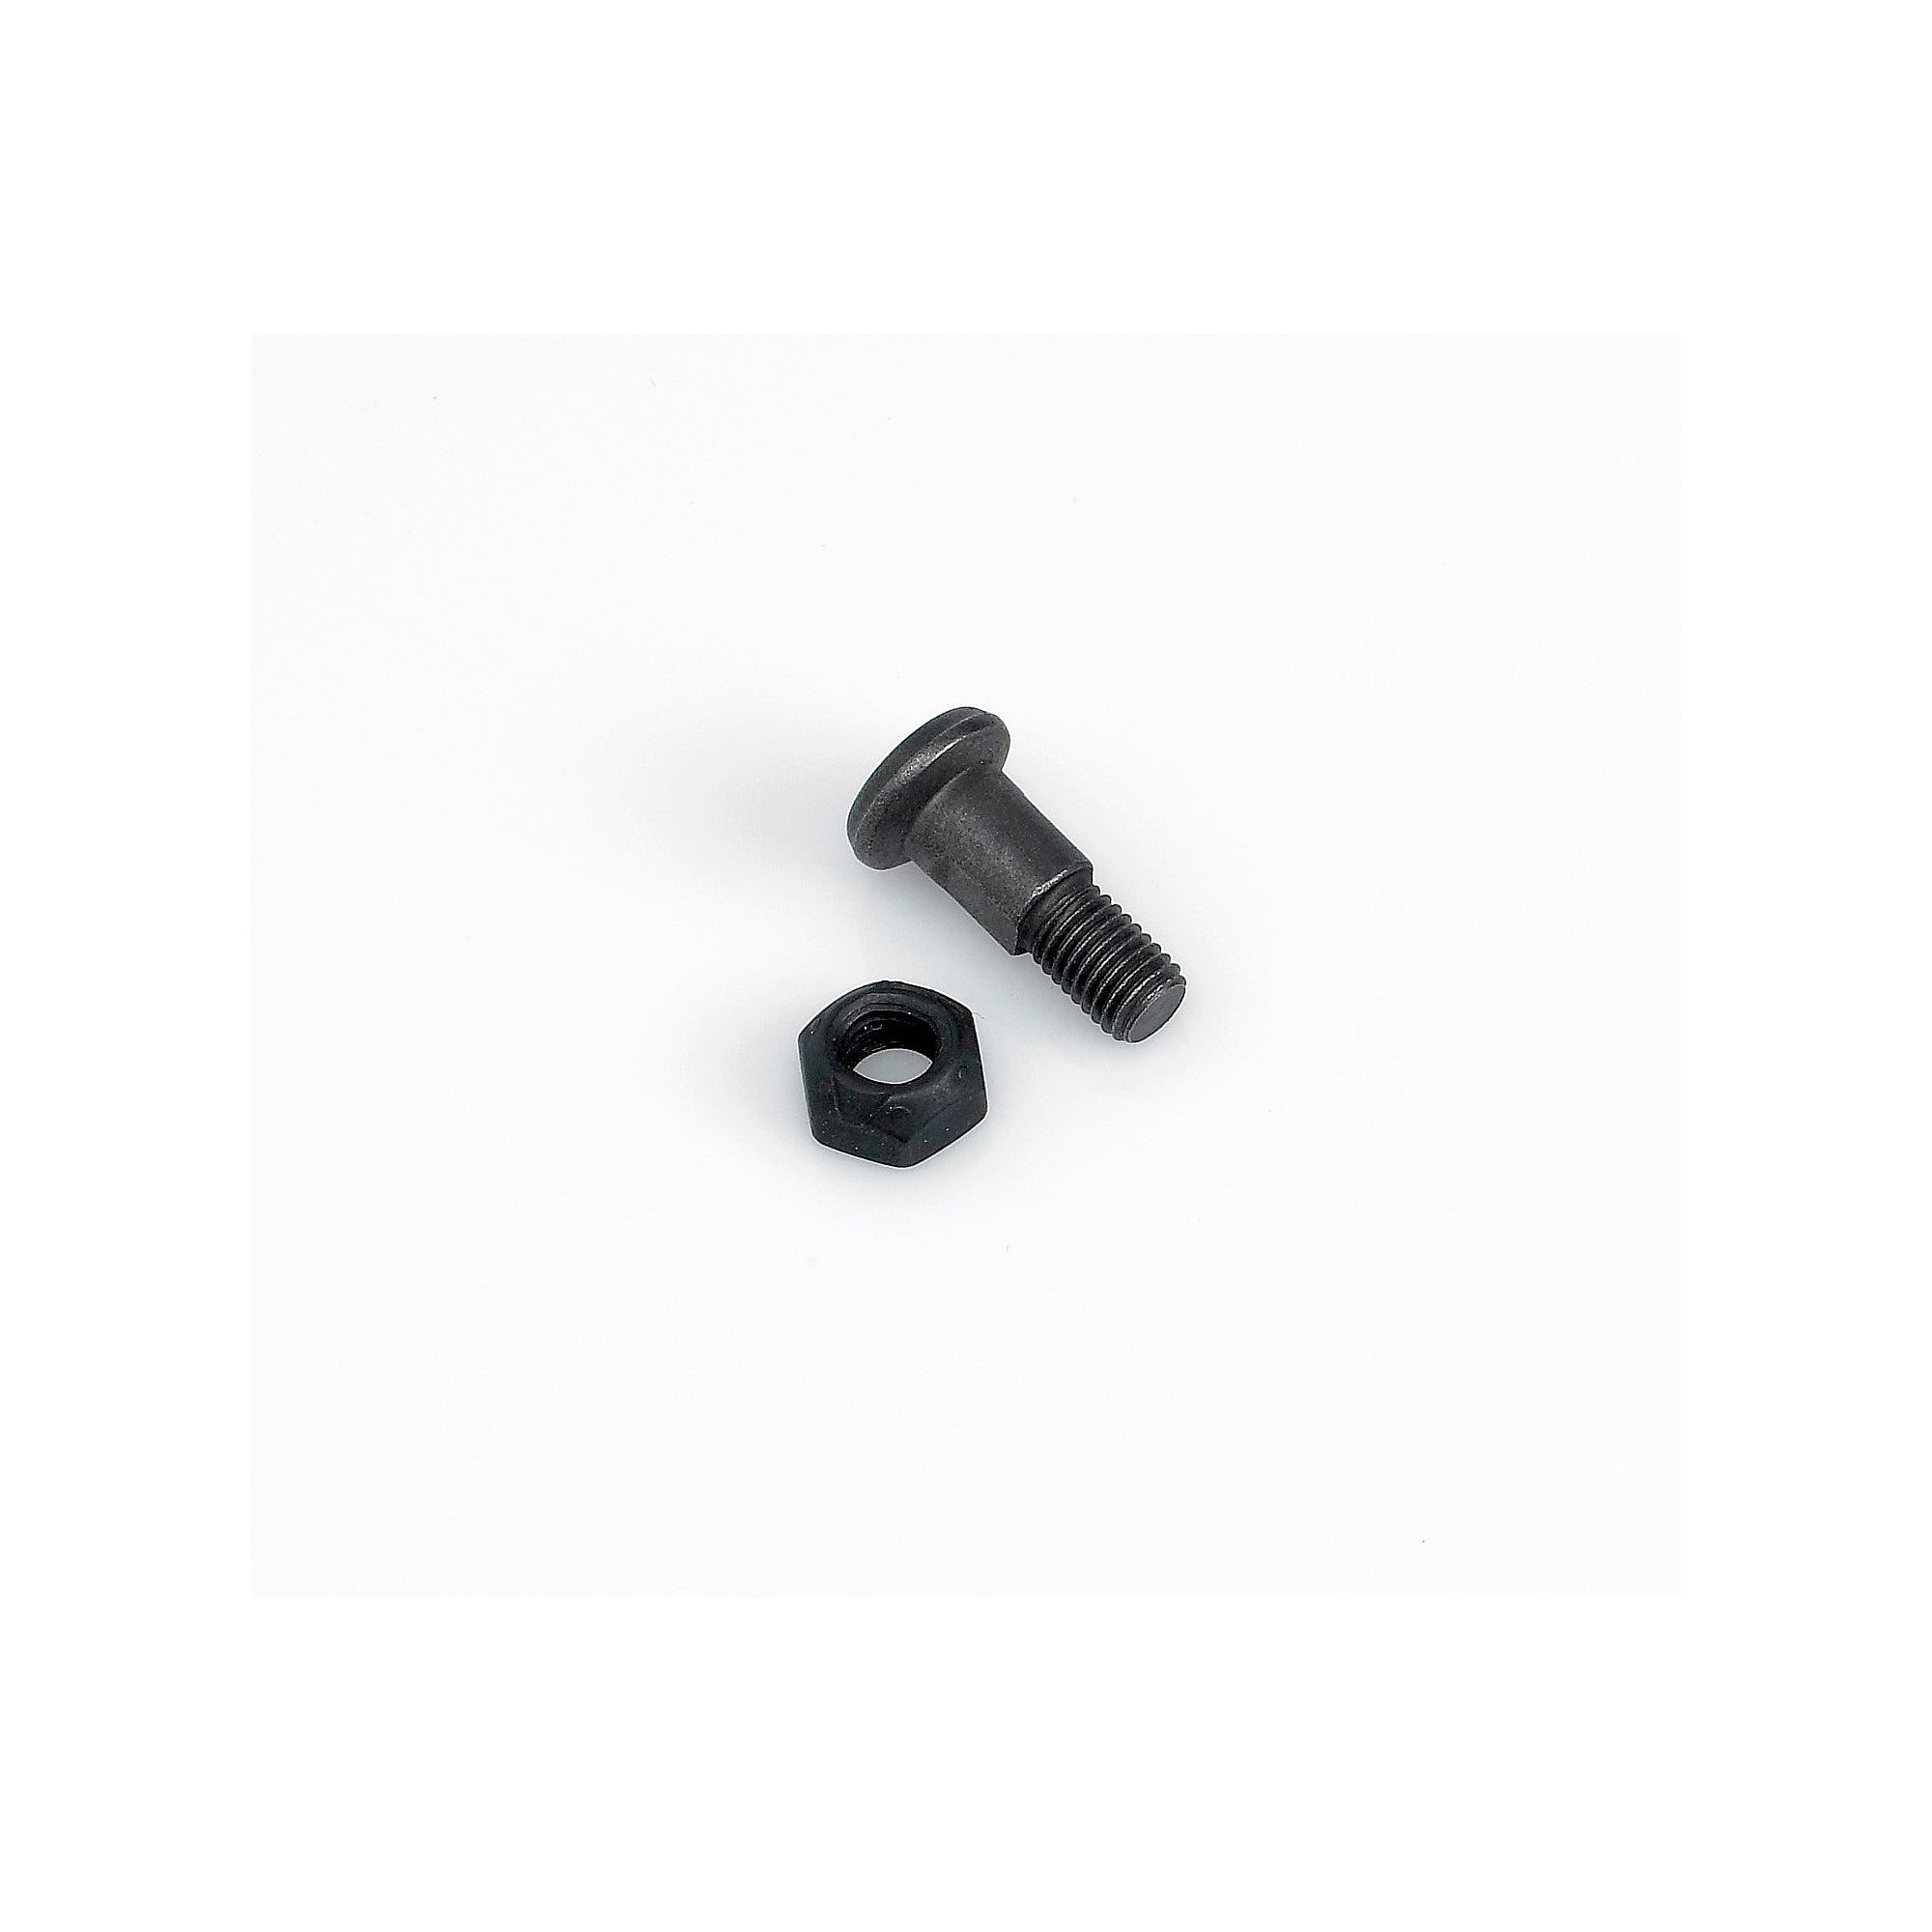 Replacement Pivot Nut and Bolt for Bypass Pruner